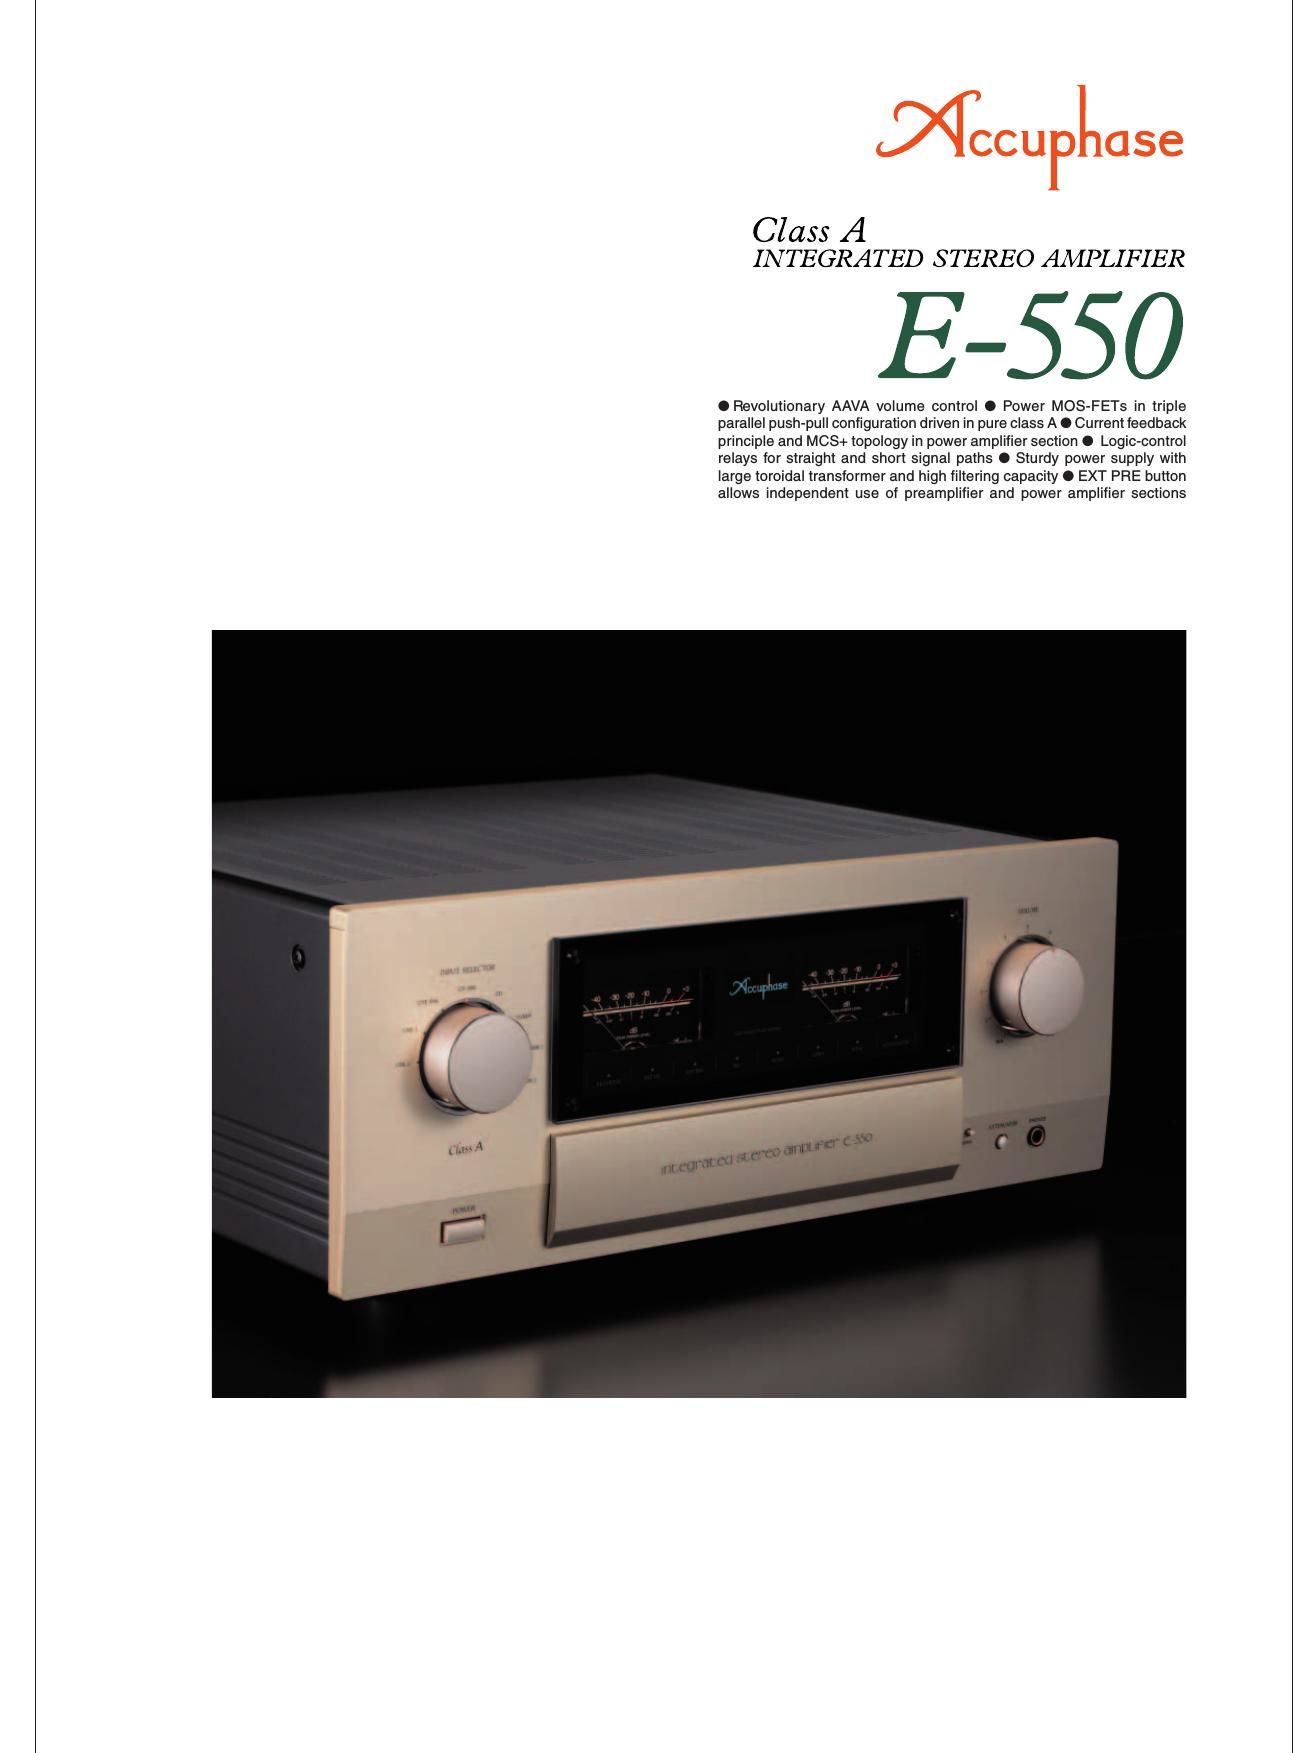 Accuphase E 550 Brochure